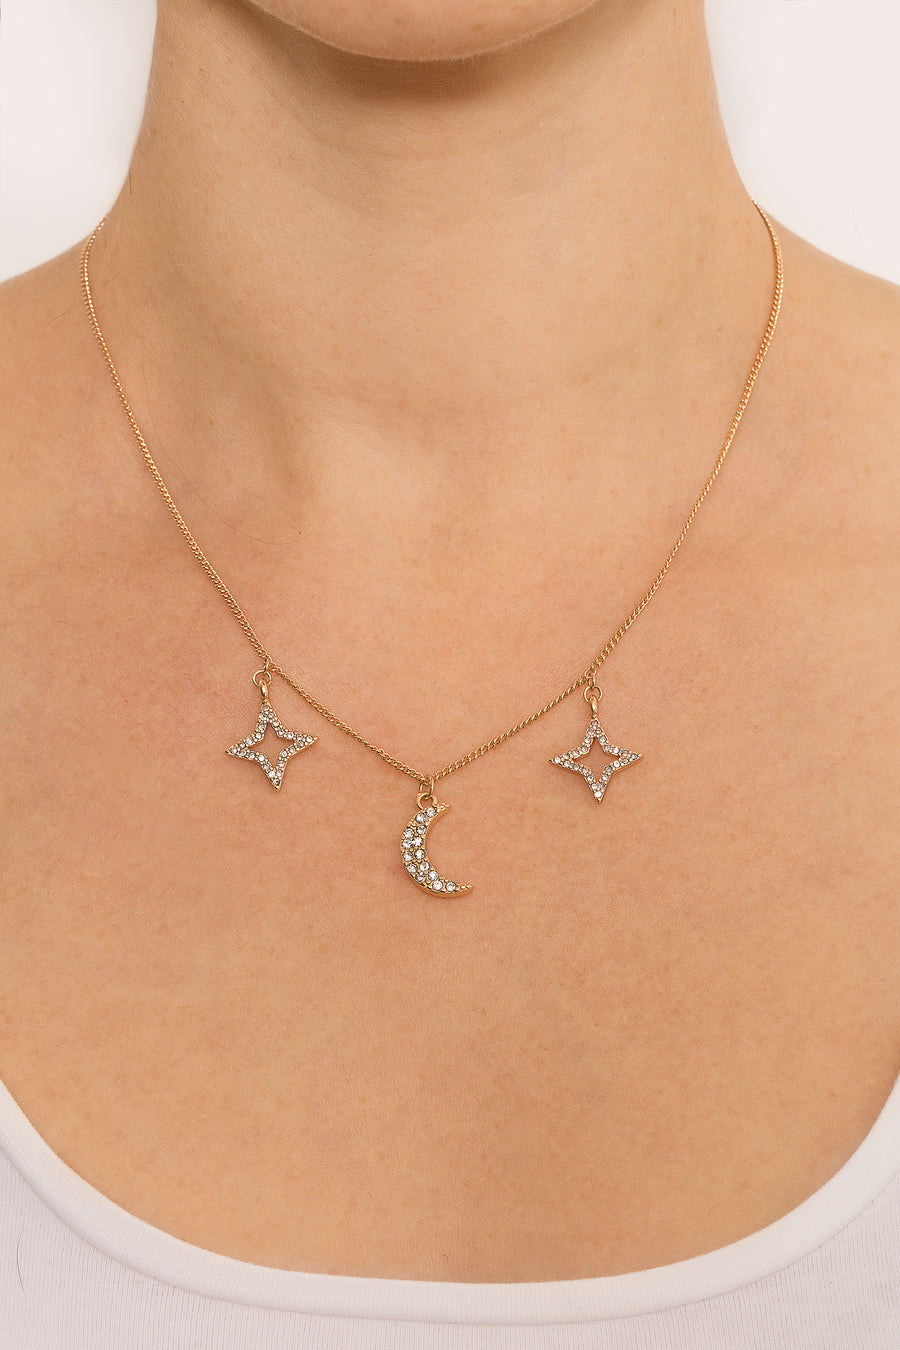 Celestial Gold Star And Moon Crystal Effect Charm Necklace